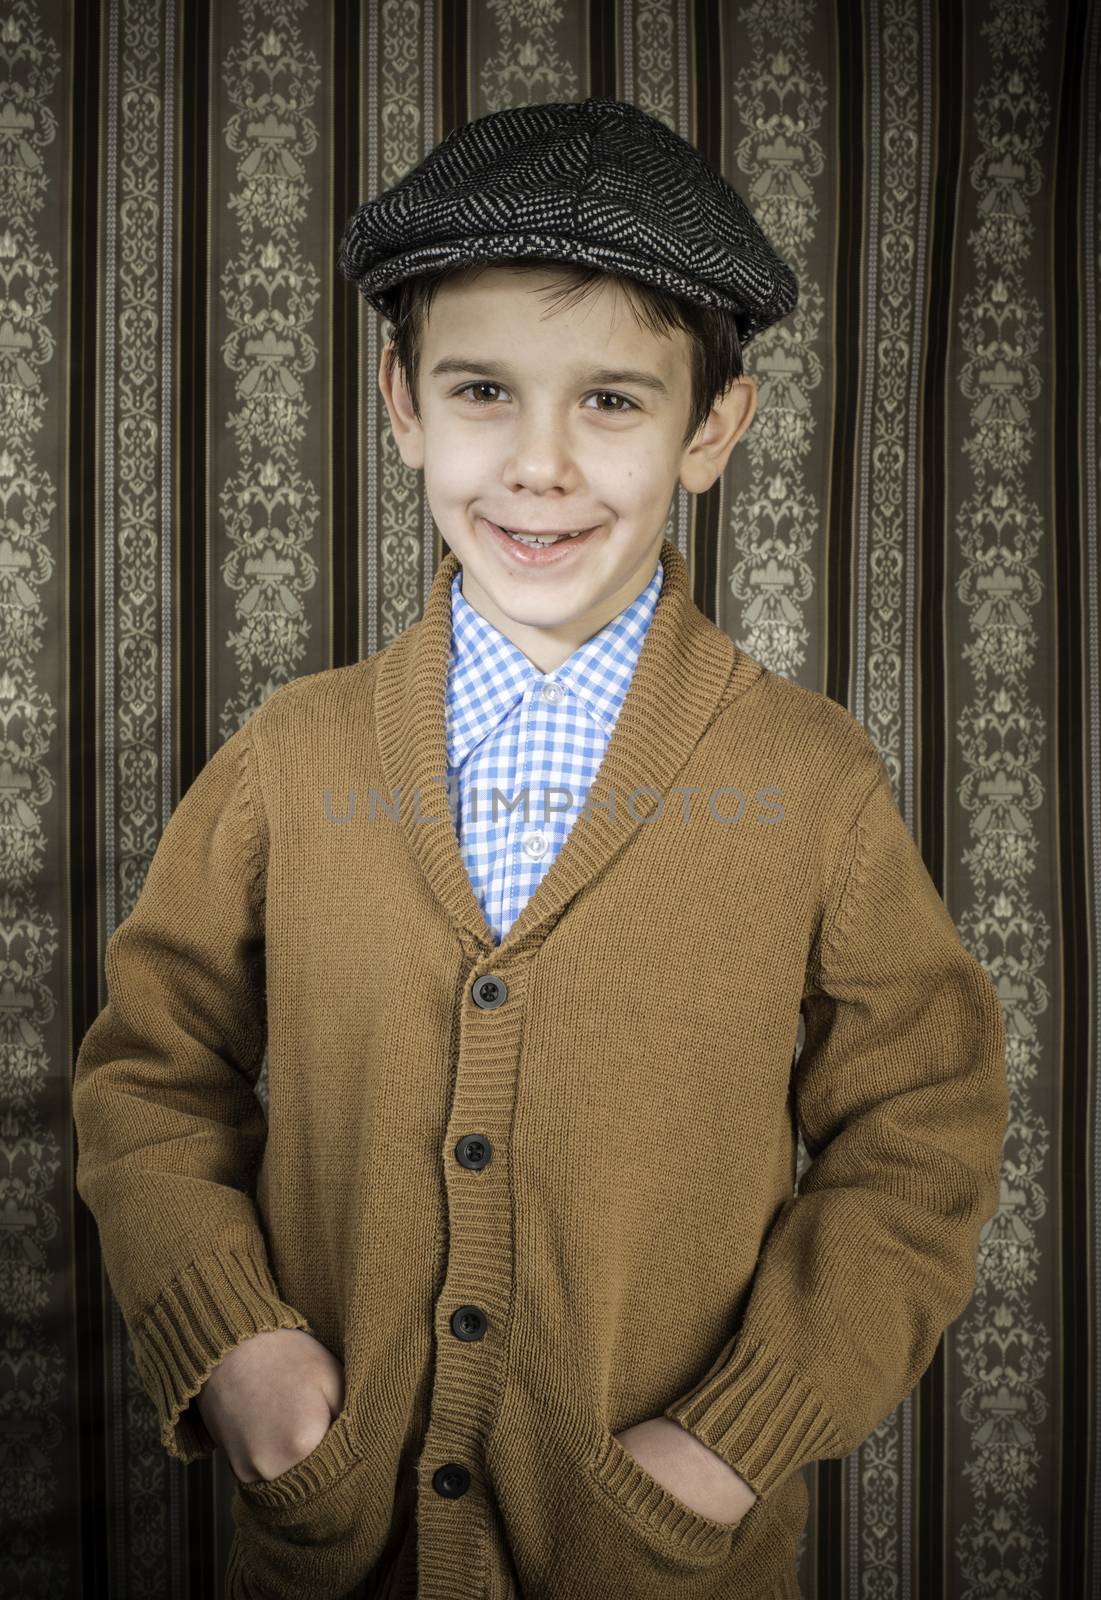 Smiling child in vintage clothes and hat by deyan_georgiev